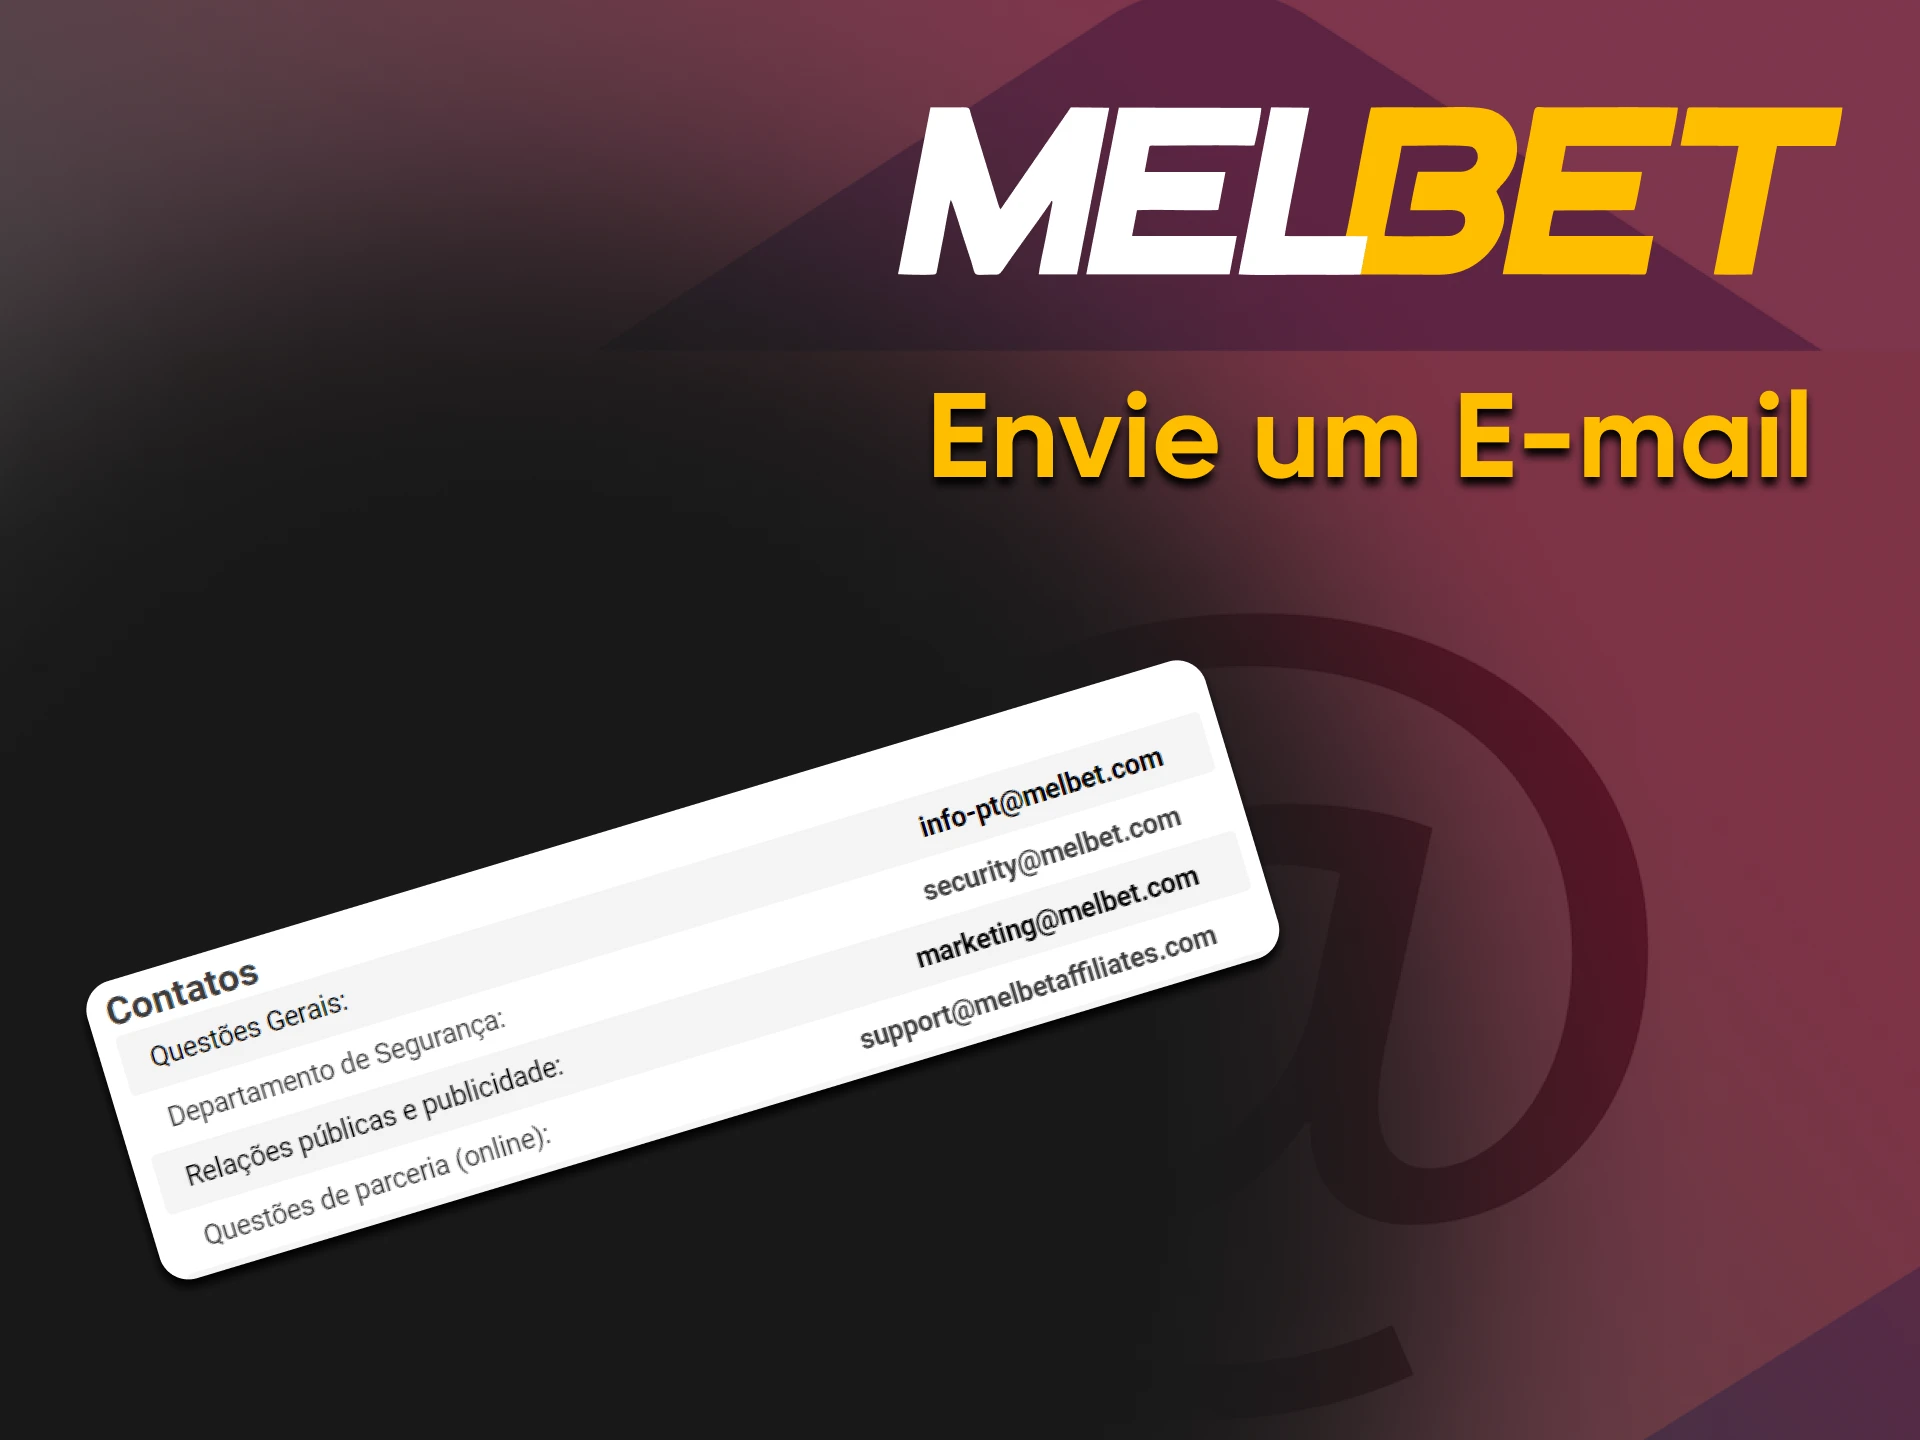 By writing to E-mail, you can contact Melbet technical support.